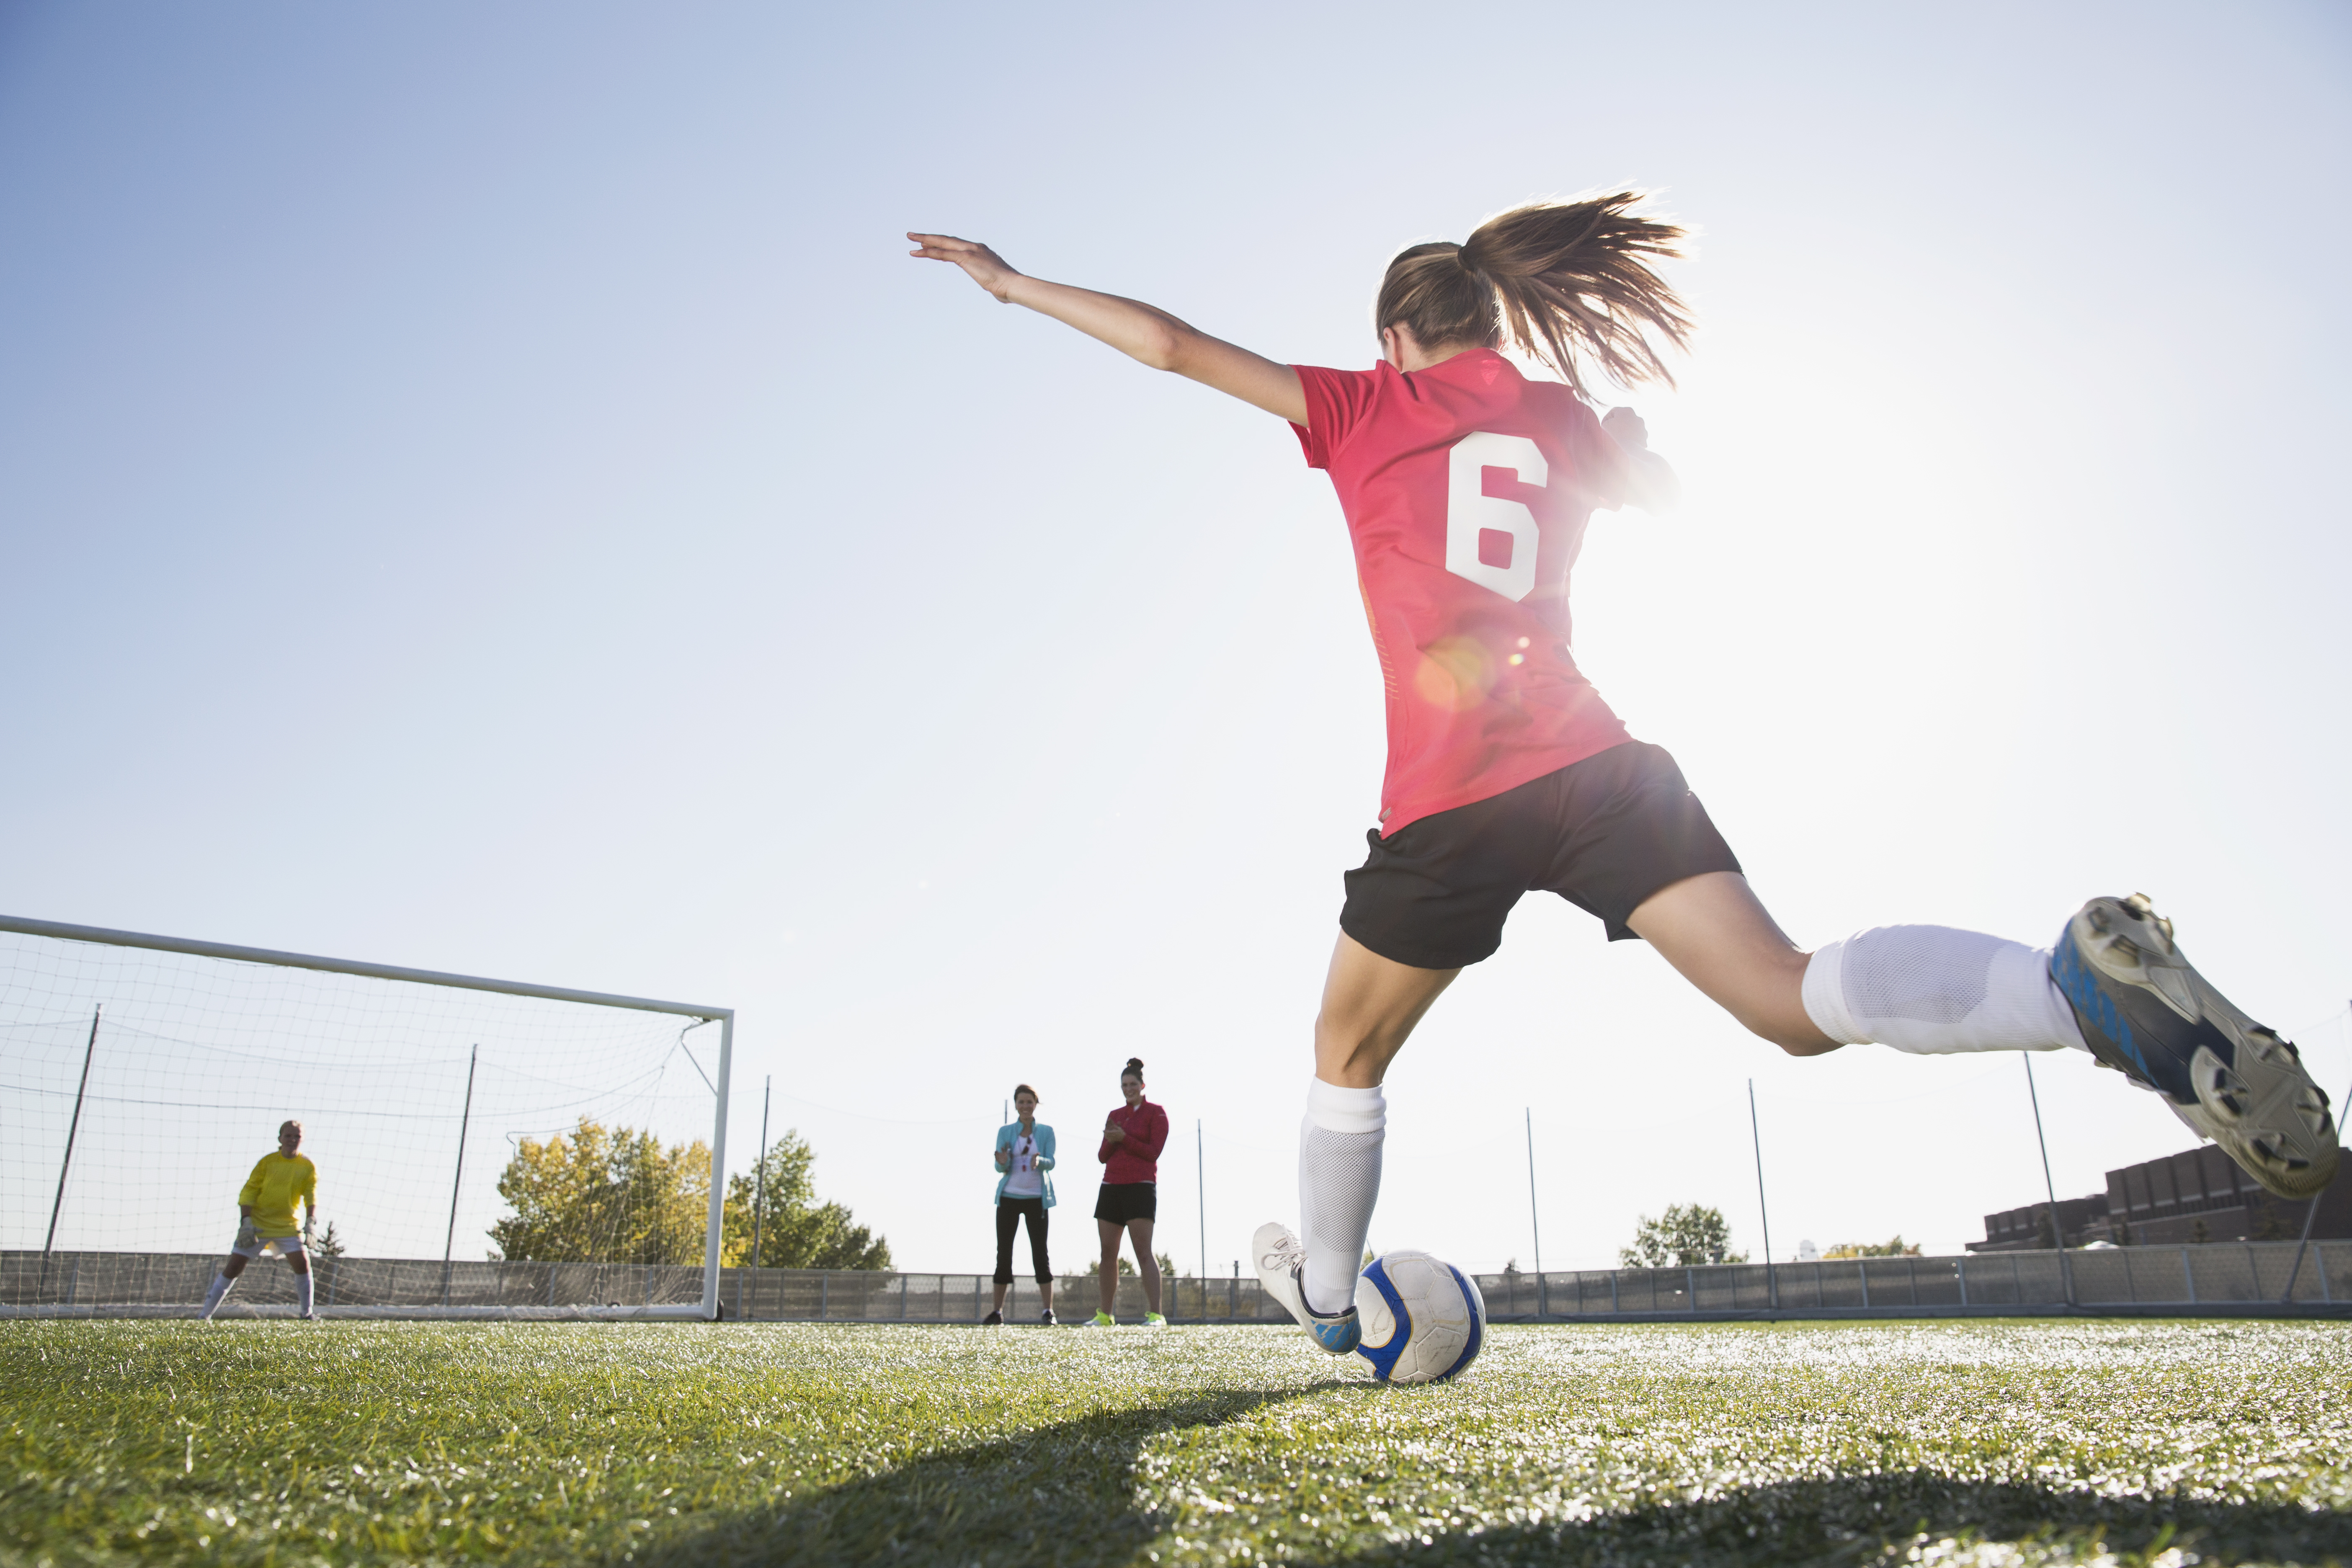 Can You Achieve Professional Soccer Success With Asthma?